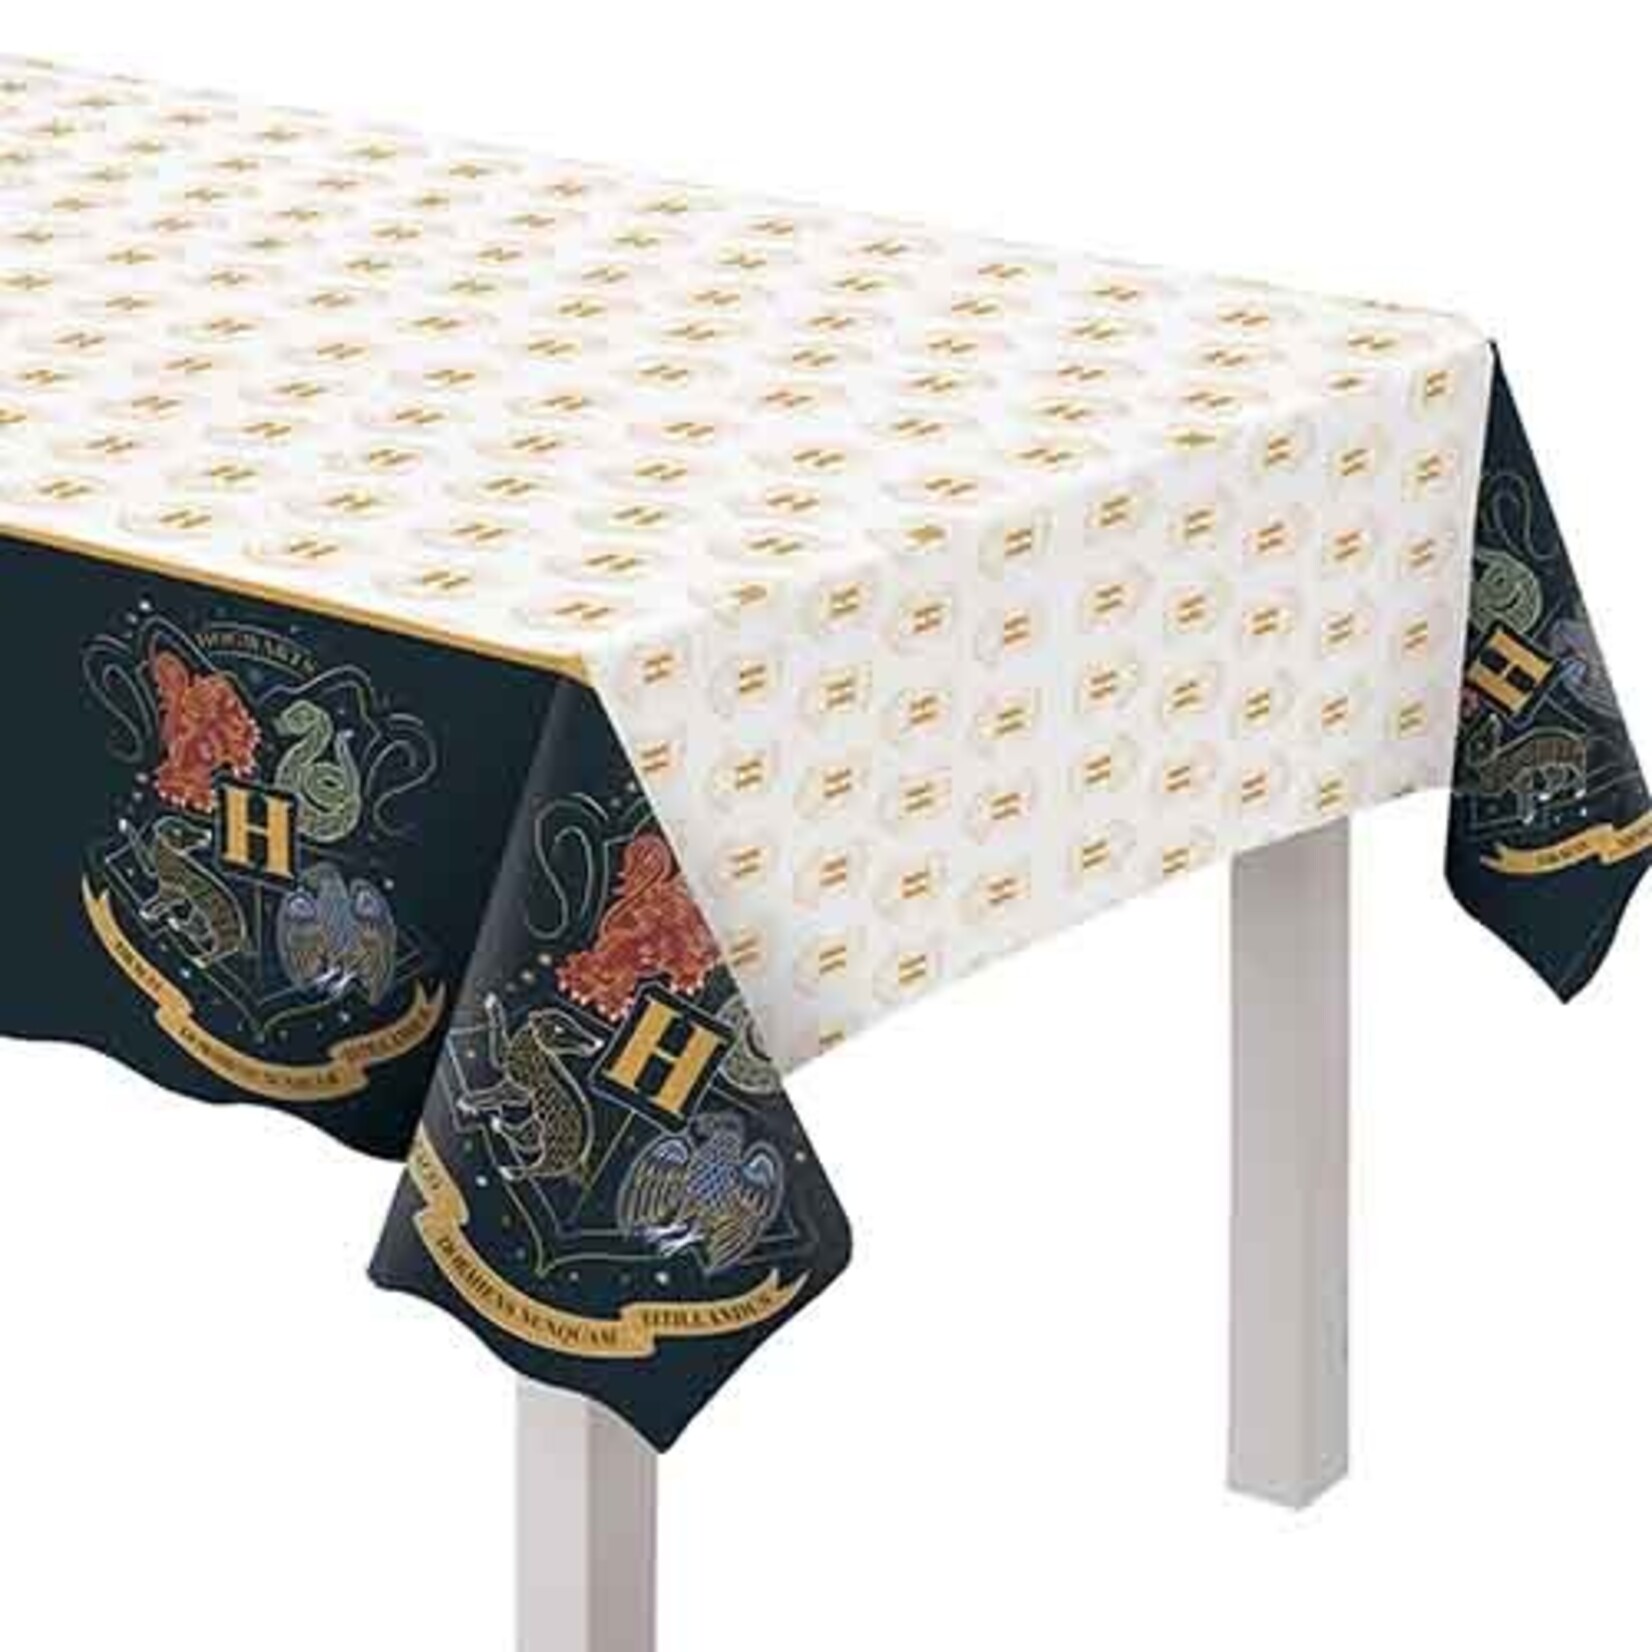 Amscan Harry Potter Hogwarts United Plastic Table Cover - 54" x 96"